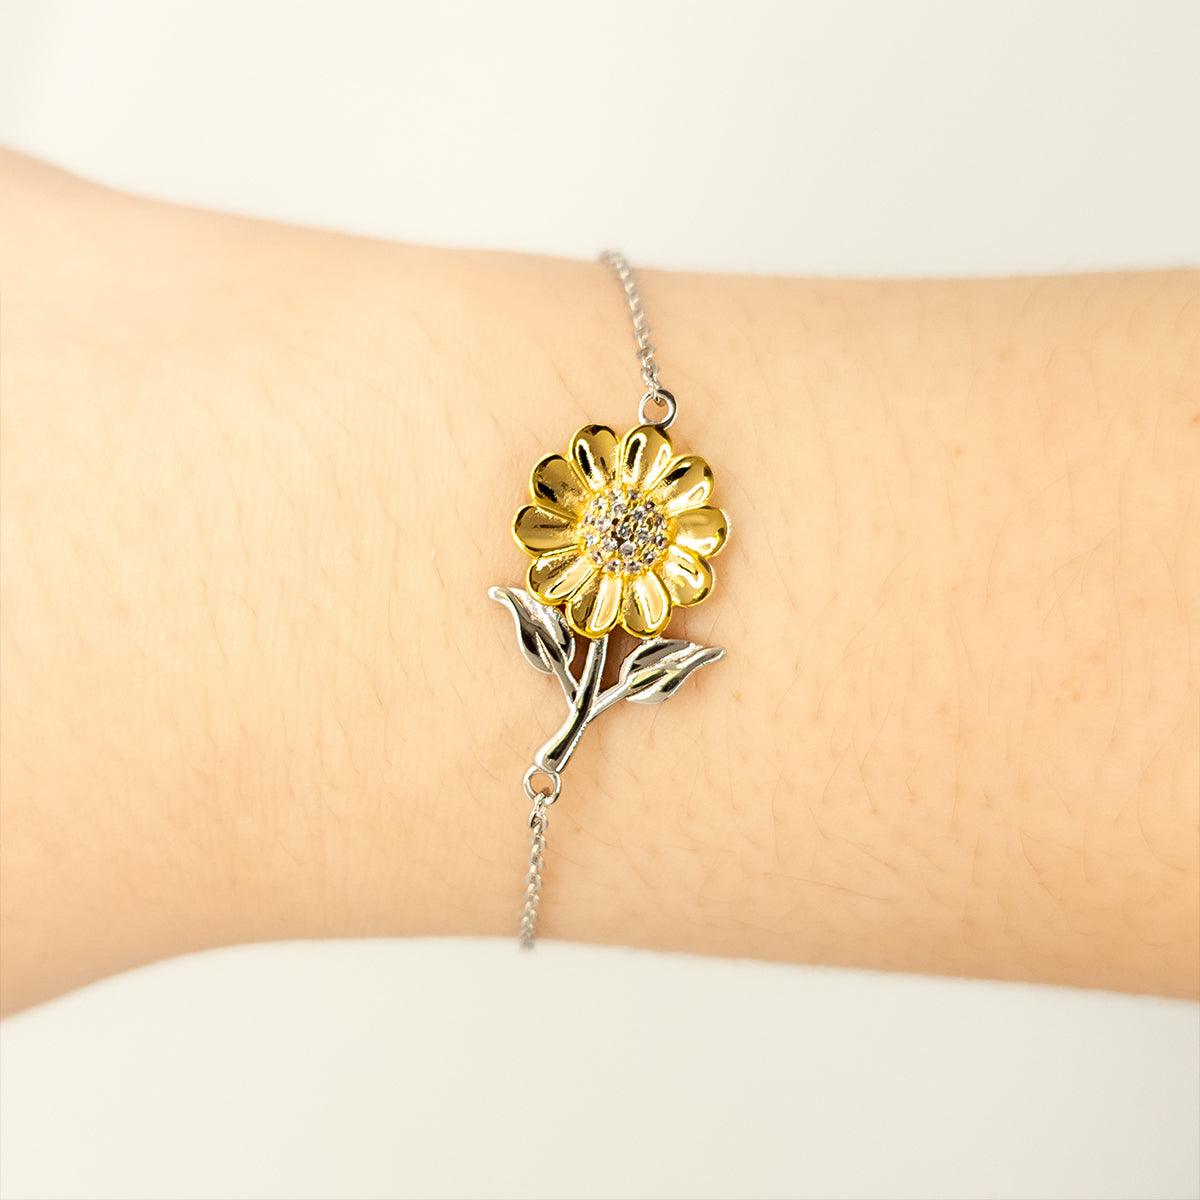 Dancer Sunflower Bracelet - Thanks for being who you are - Birthday Christmas Jewelry Gifts Coworkers Colleague Boss - Mallard Moon Gift Shop